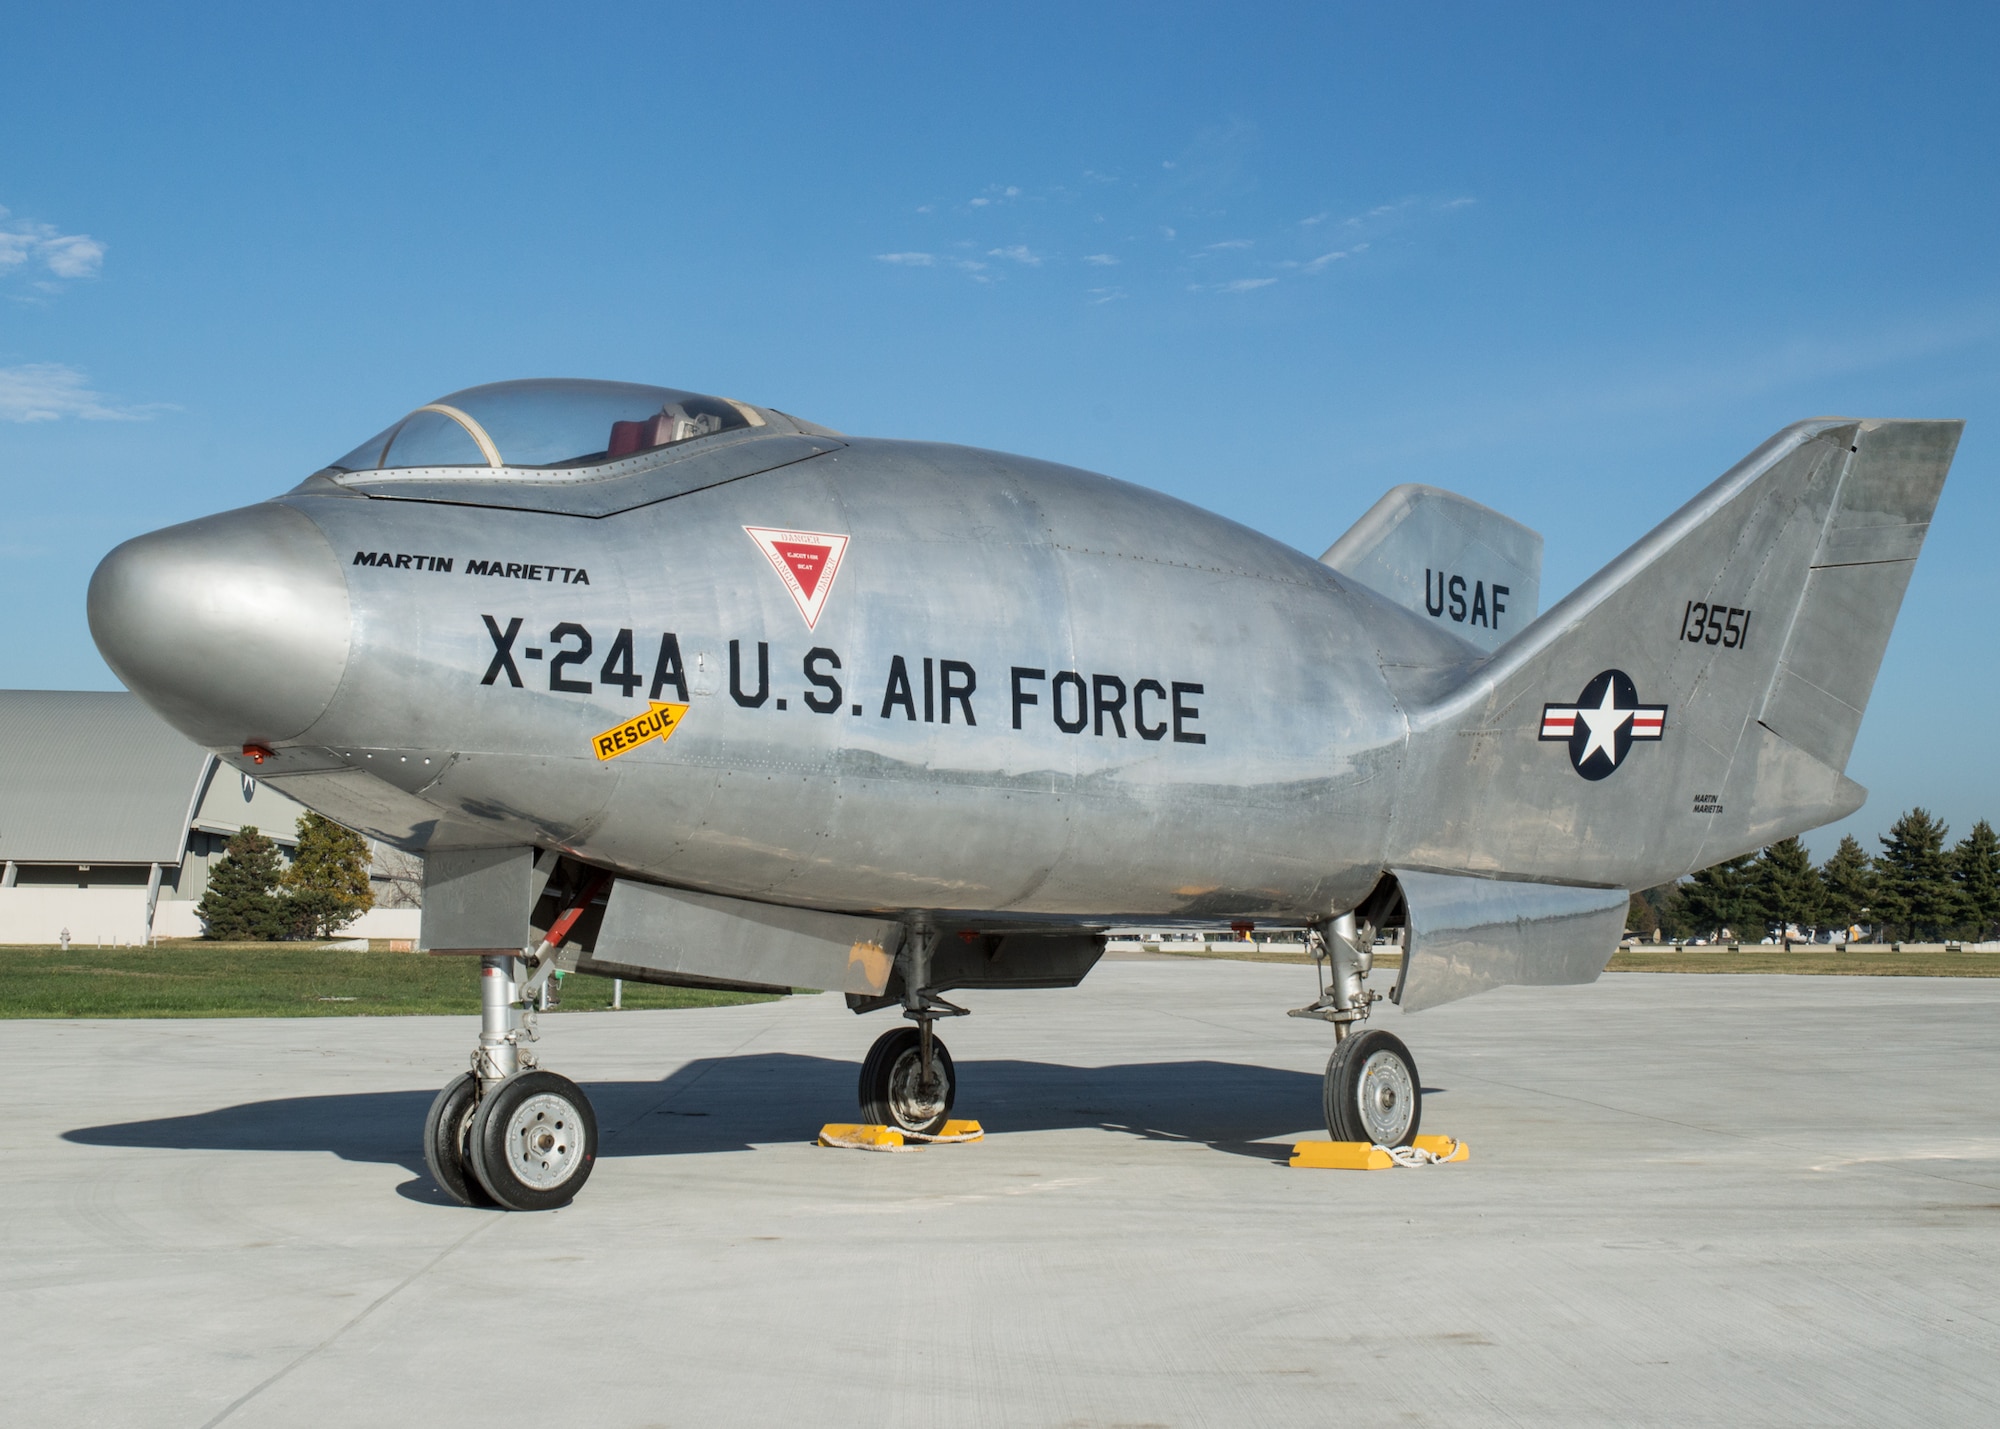 Restoration staff move the Martin X-24A into the new fourth building at the National Museum of the U.S. Air Force on Oct. 14, 2015. (U.S. Air Force photo by Ken LaRock)